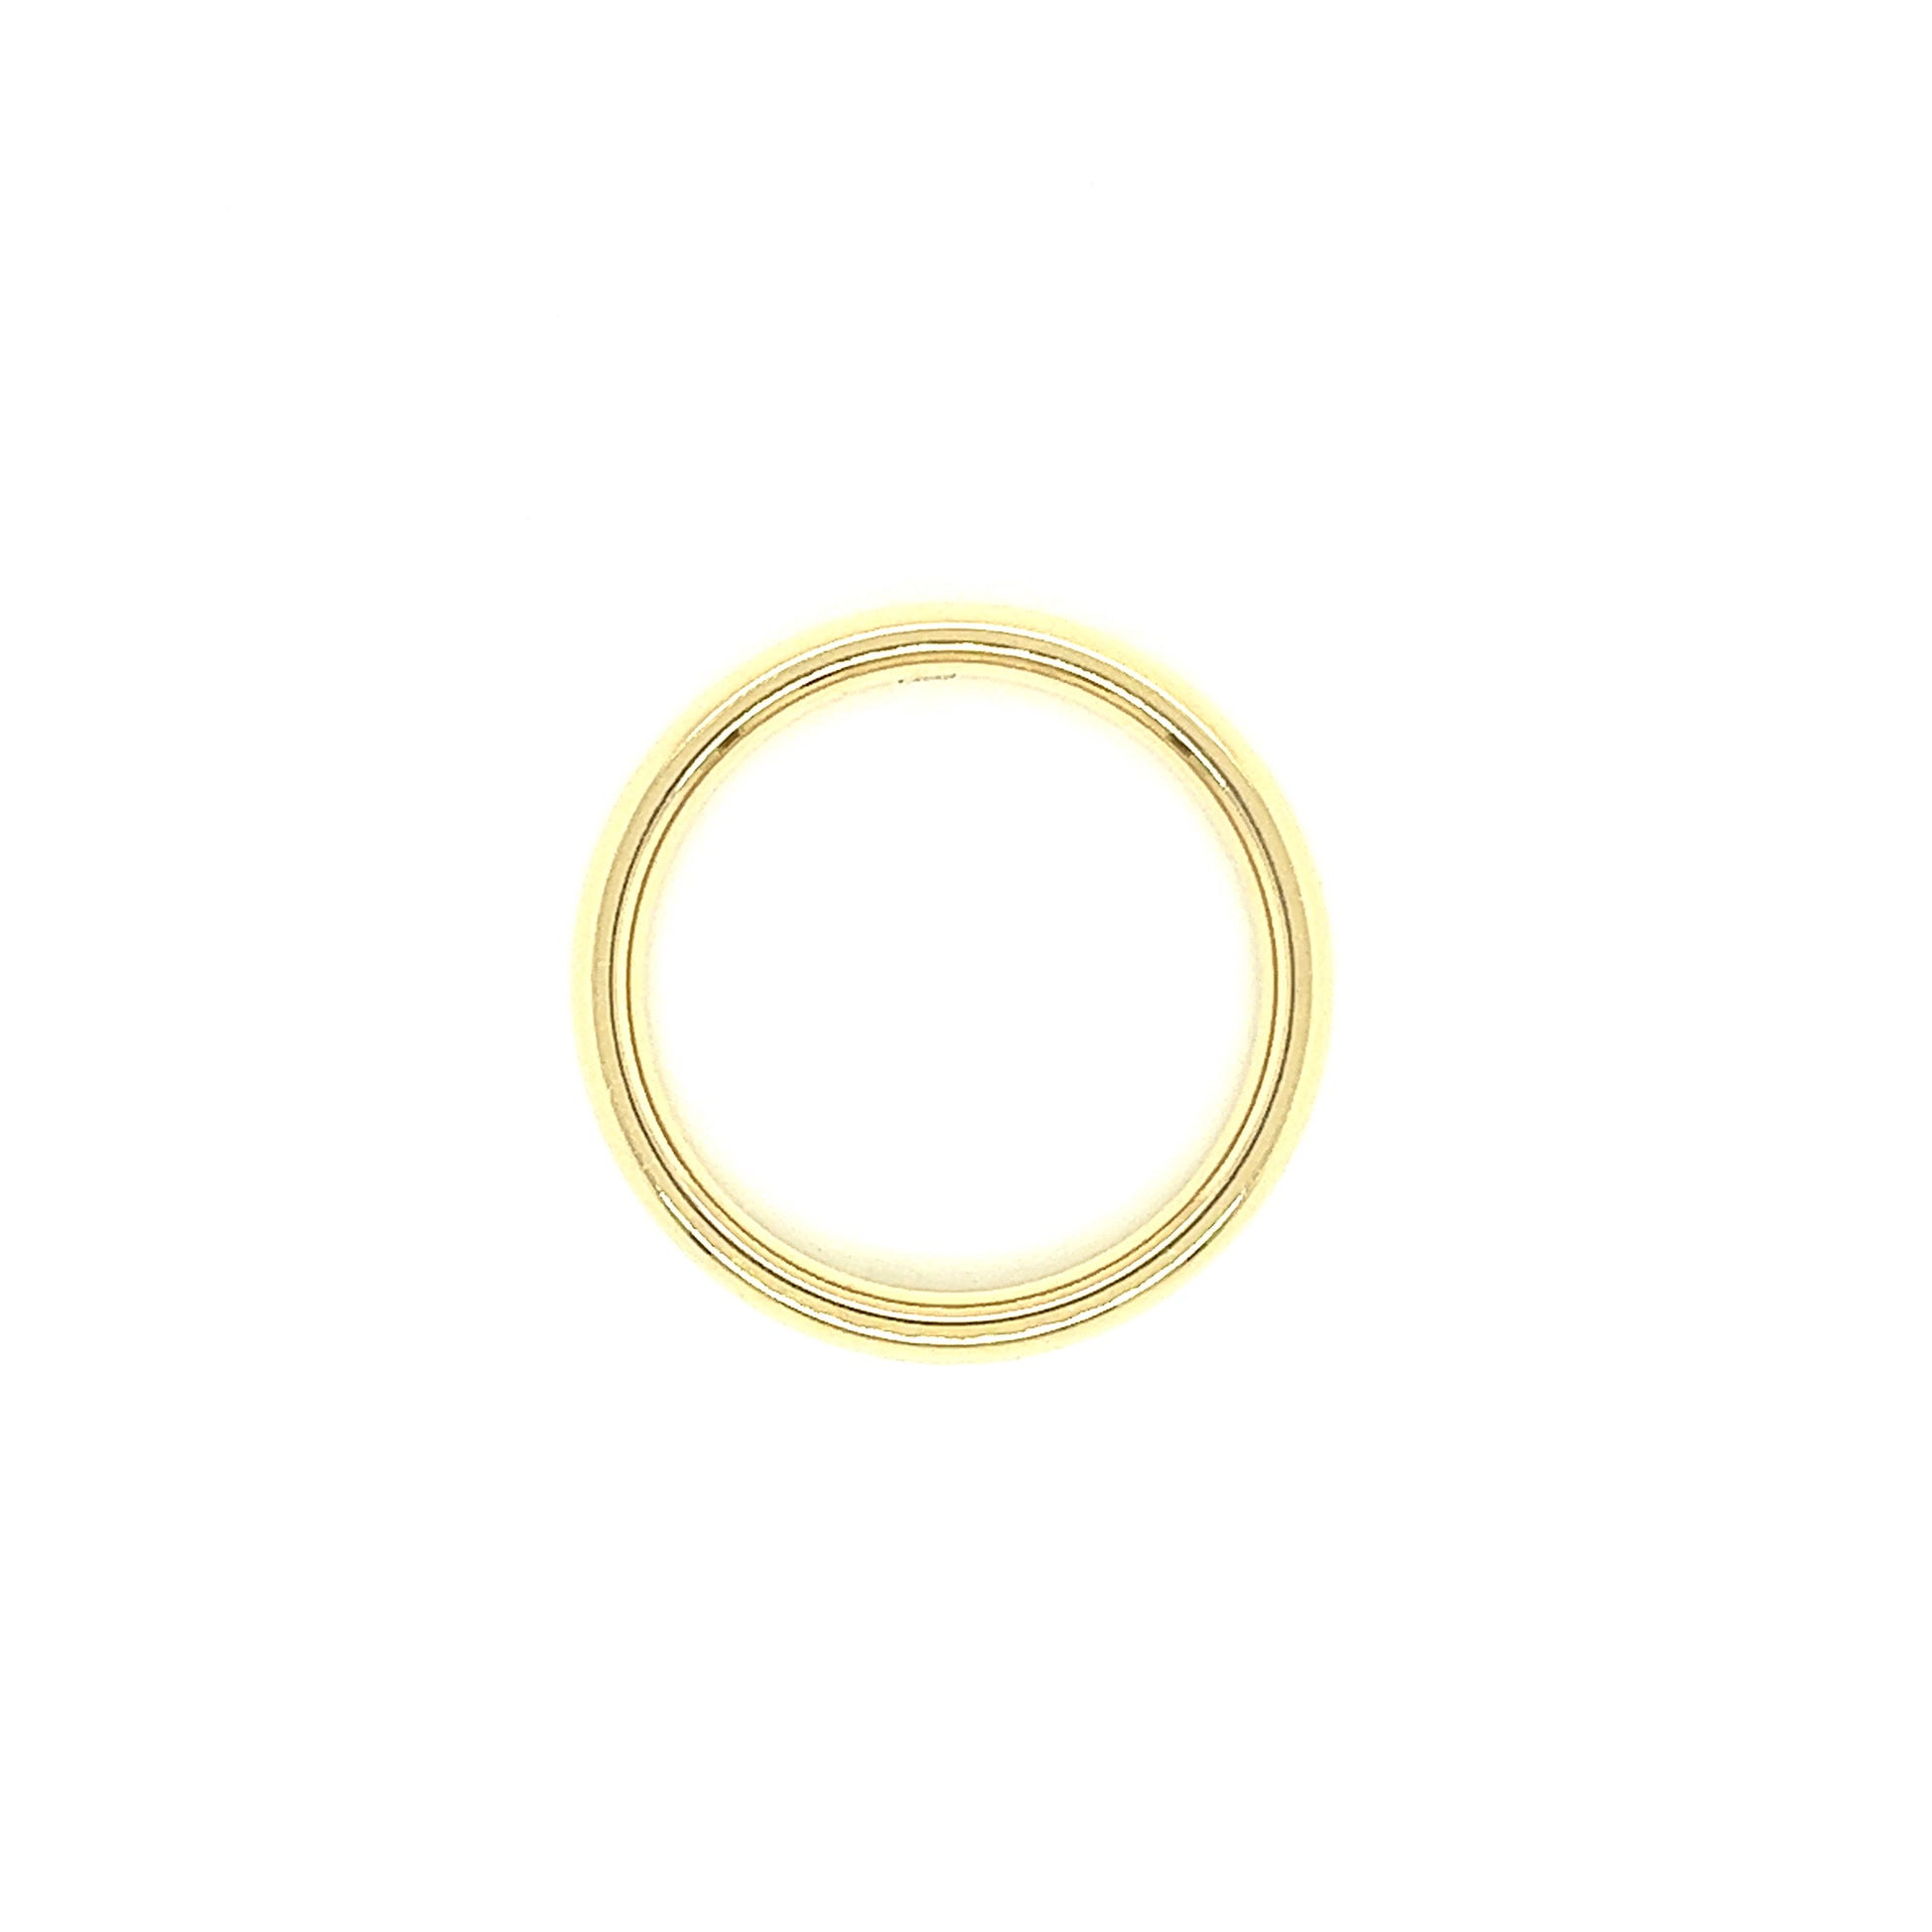 Half Round 5mm Ring with Comfort Fit in 14K Yellow Gold Top View